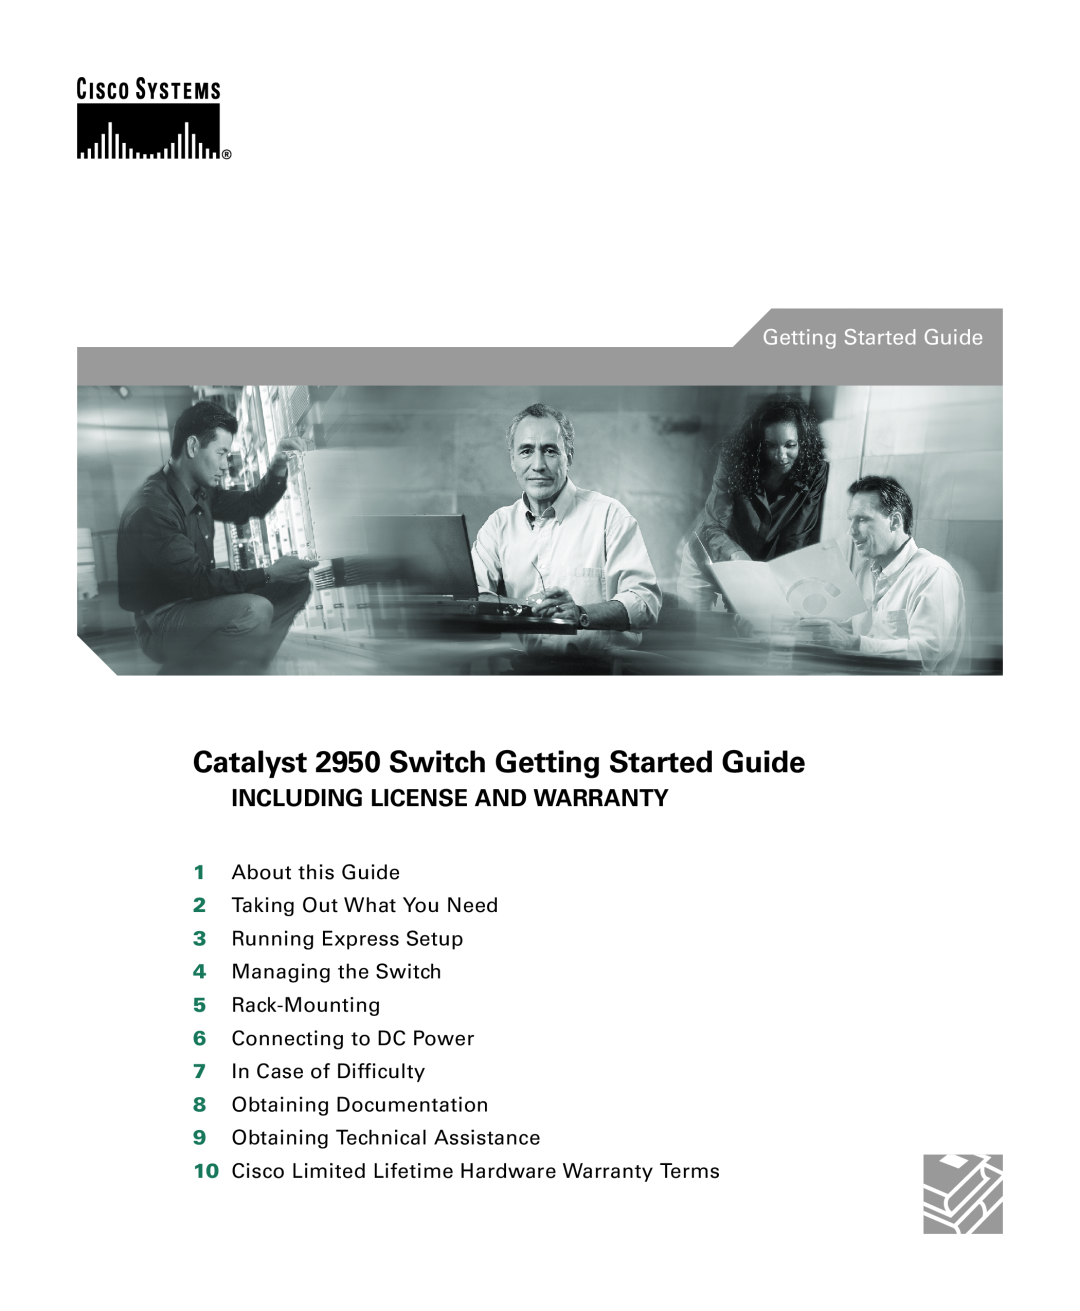 Cisco Systems CATALYST 2950 manual About this Guide 2 Taking Out What You Need 3 Running Express Setup 